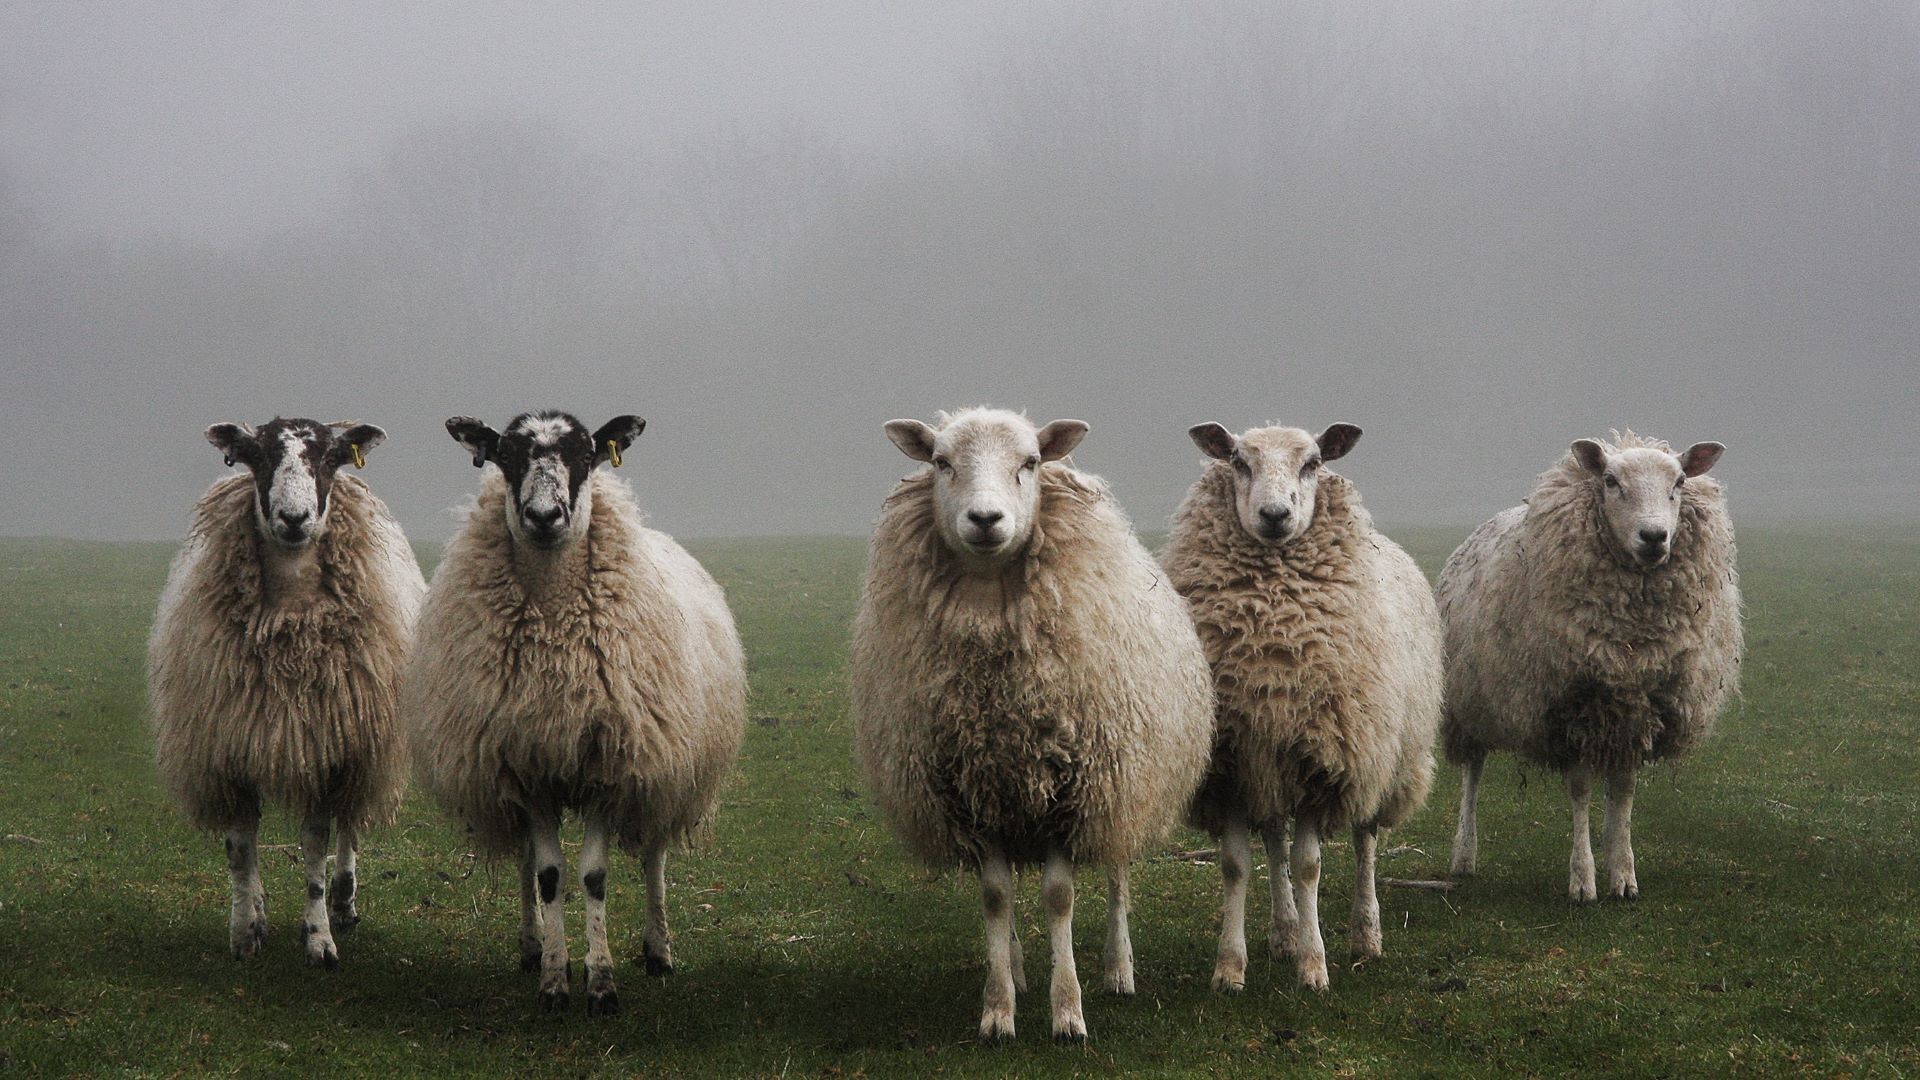 five sheep standing in formation in a field with morning mist